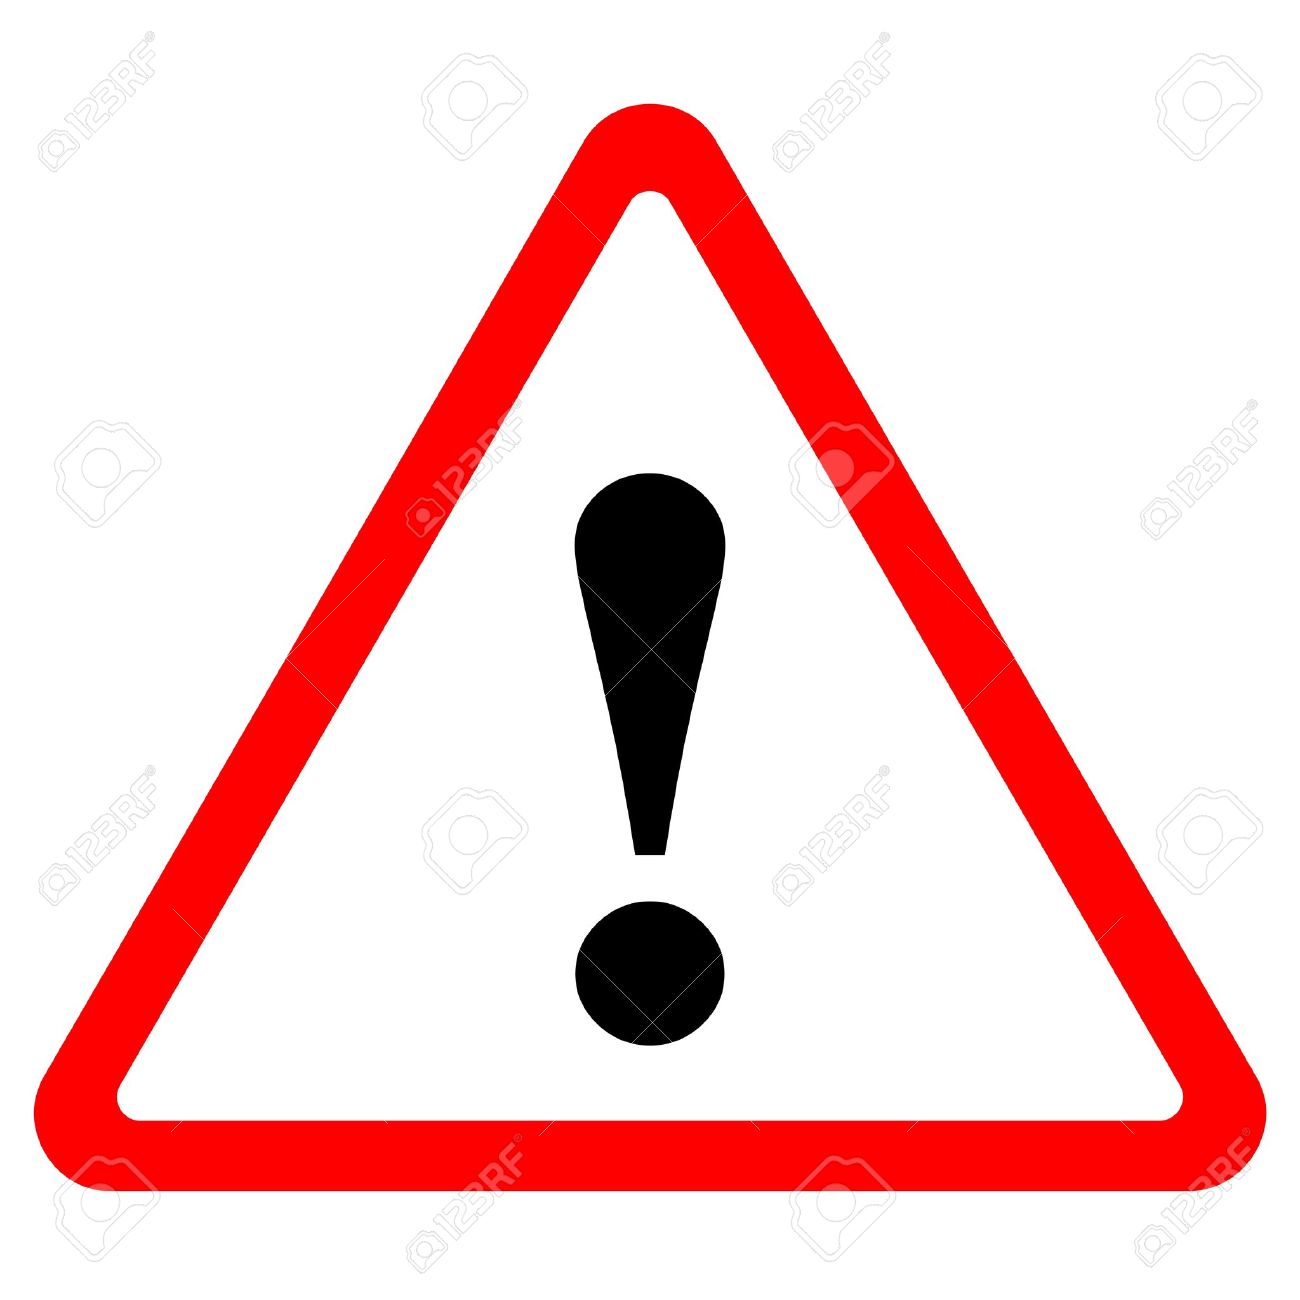 Sign free download best. Attention clipart warning triangle